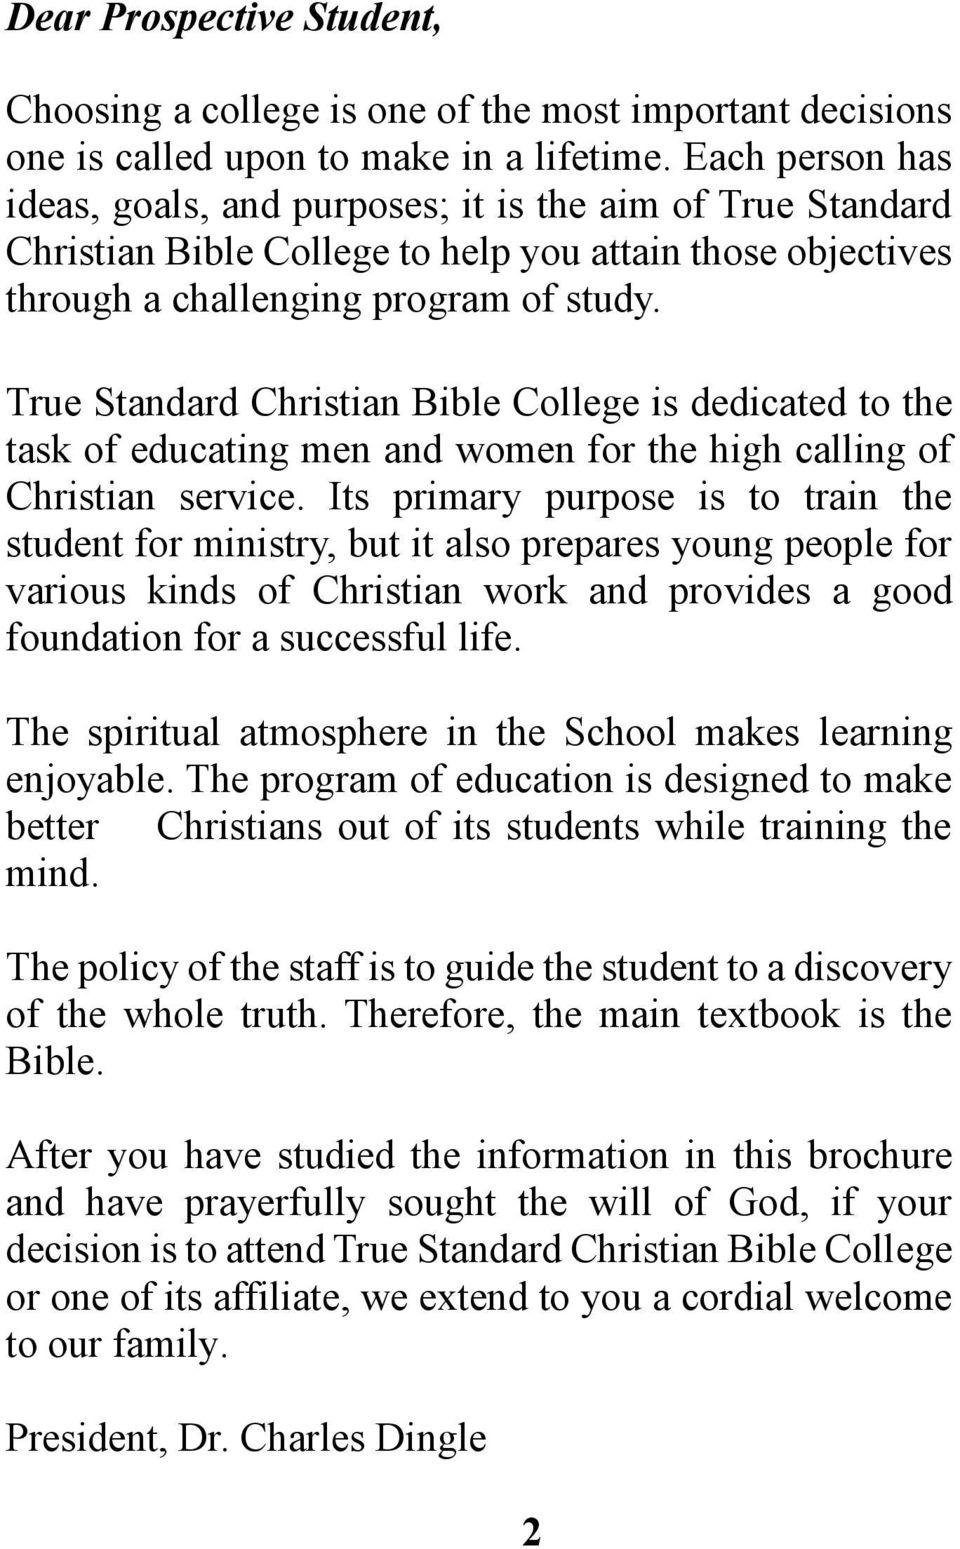 True Standard Christian Bible College is dedicated to the task of educating men and women for the high calling of Christian service.